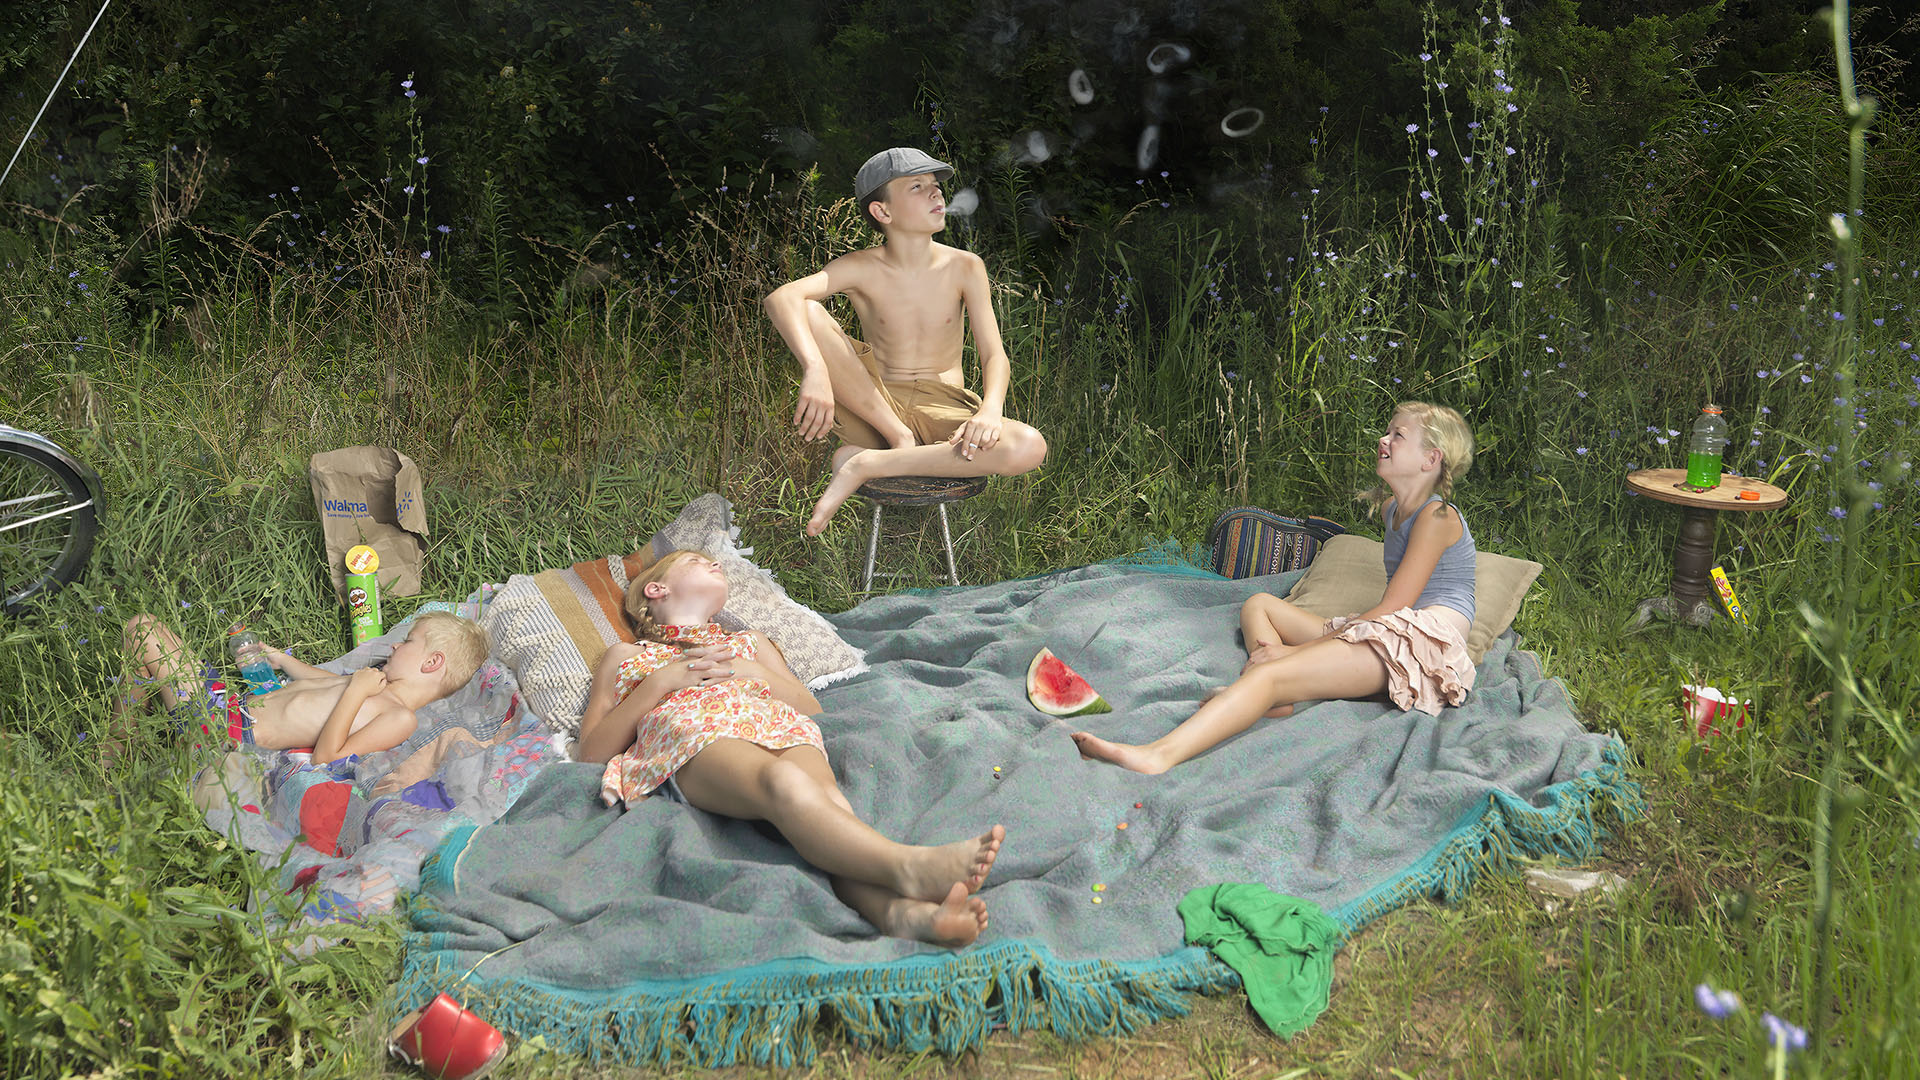 Julie Blackmon’s Surreal Photographs of Contemporary American Life